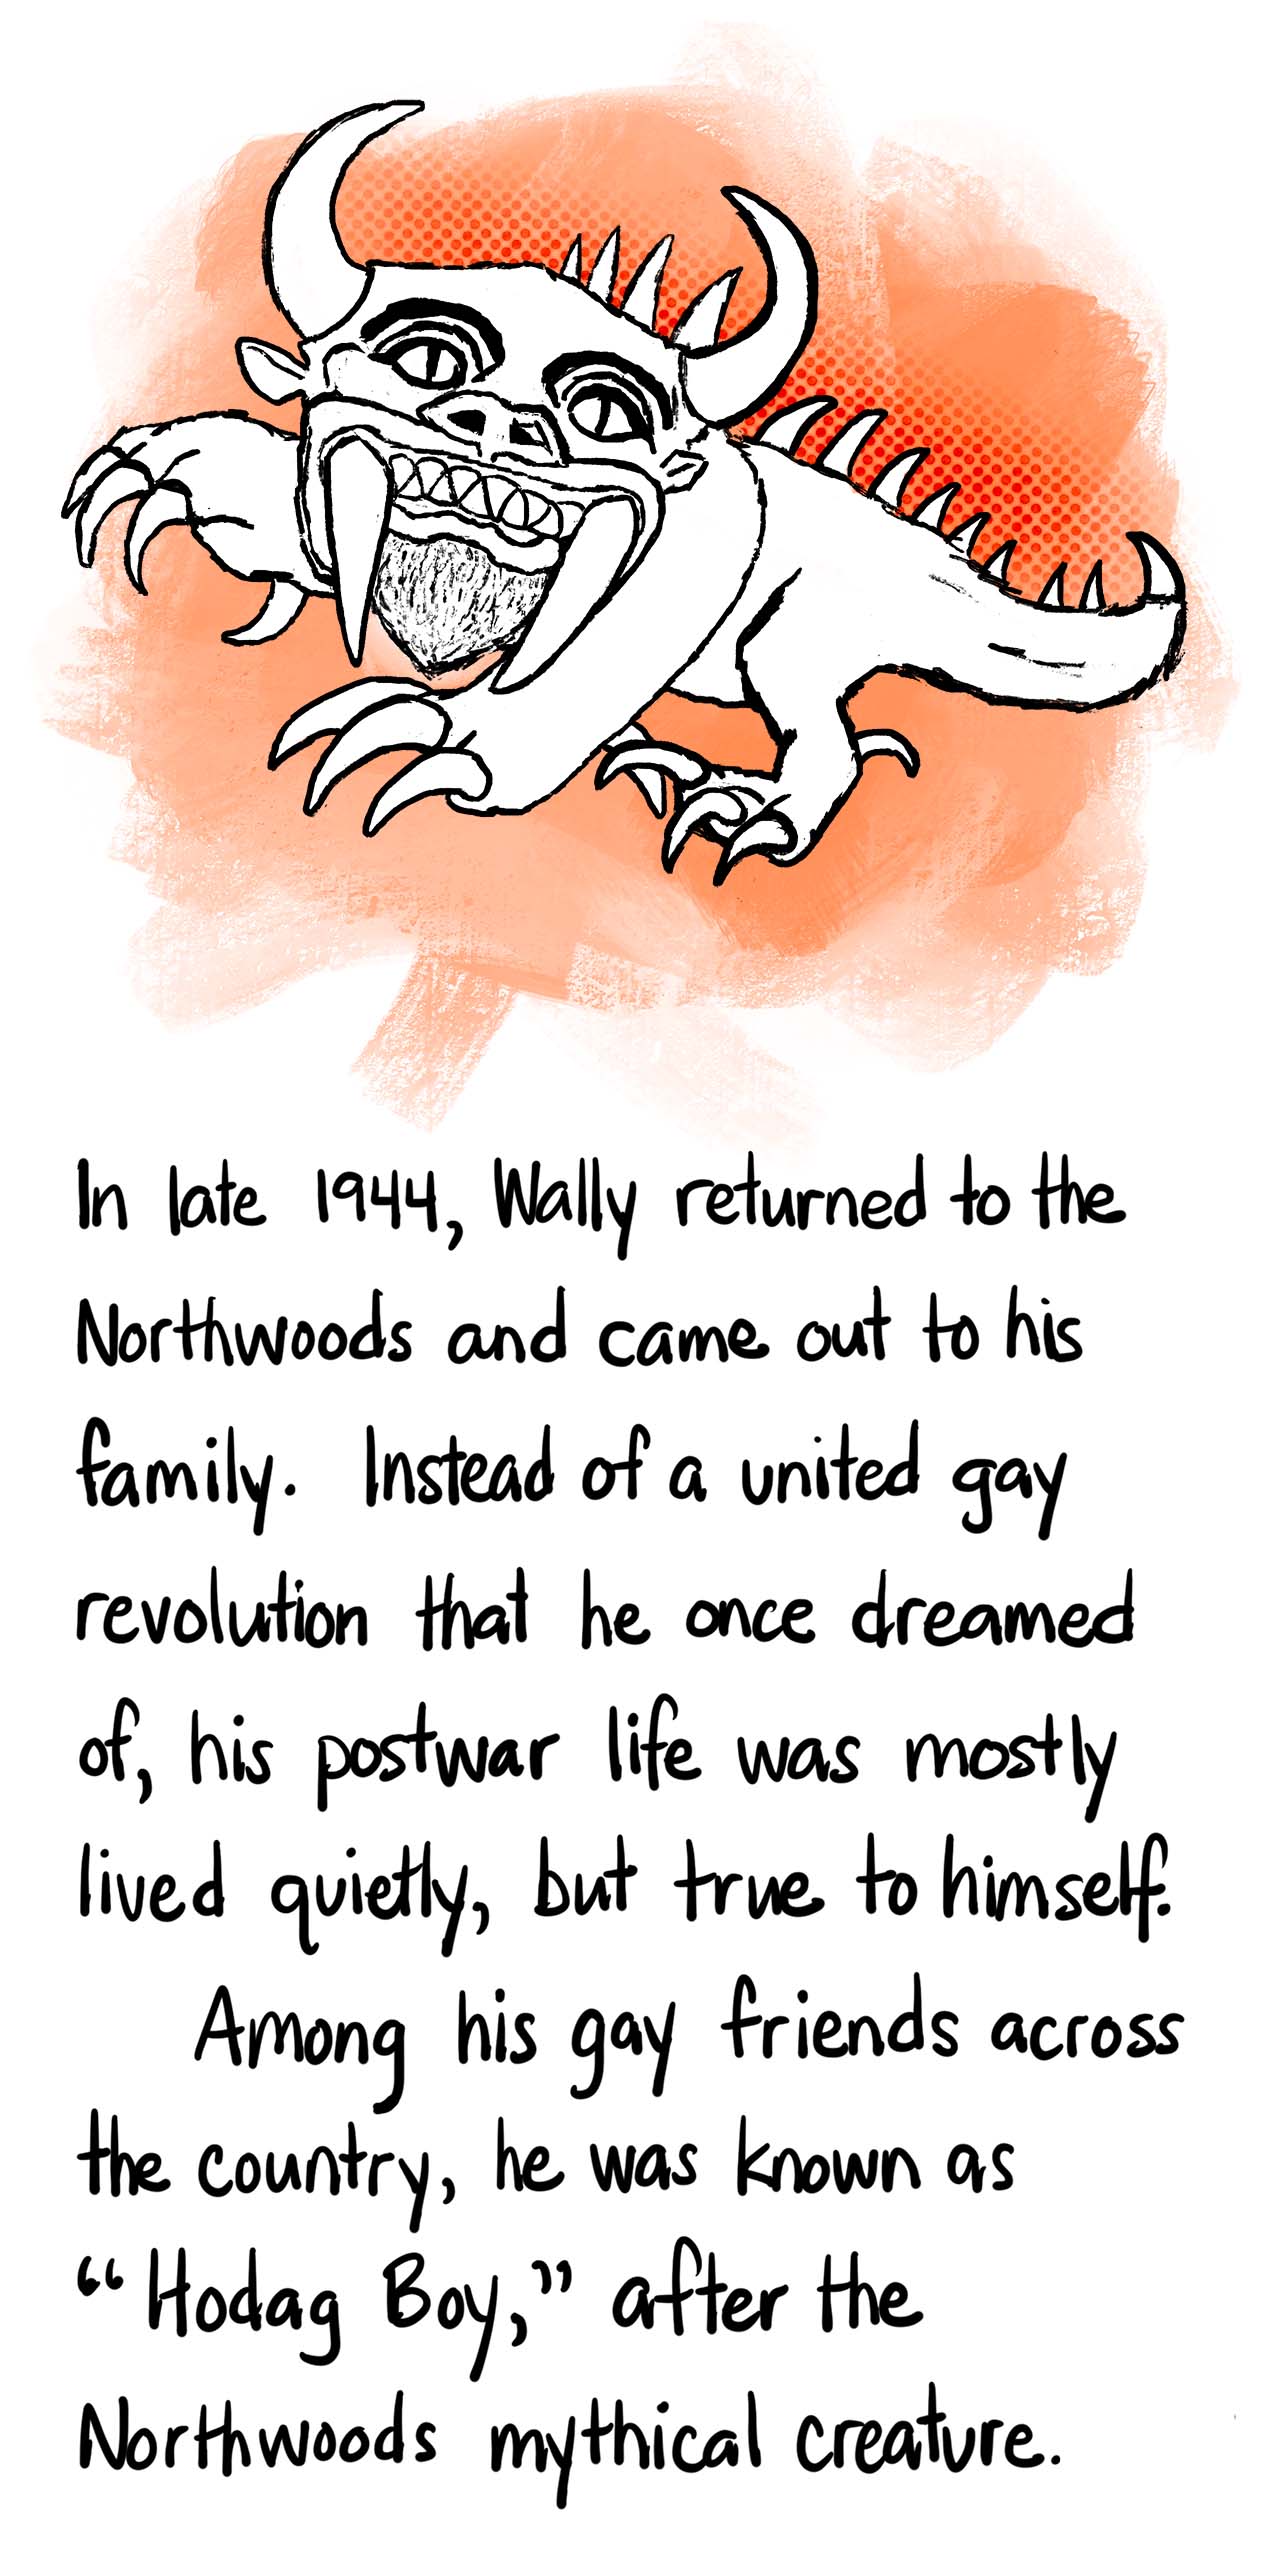 Image: Hodag with bull horns, huge fangs and thick curved spines down its back. Text: In late 1944, Wally returned to the Northwoods and came out to his family. Instead of a united gay revolution that he once dreamed of, his postwar life was mostly lived quietly, but true to himself. Among his gay friends across the country, he was known as “Hodag Boy,” after the Northwoods mythical creature.